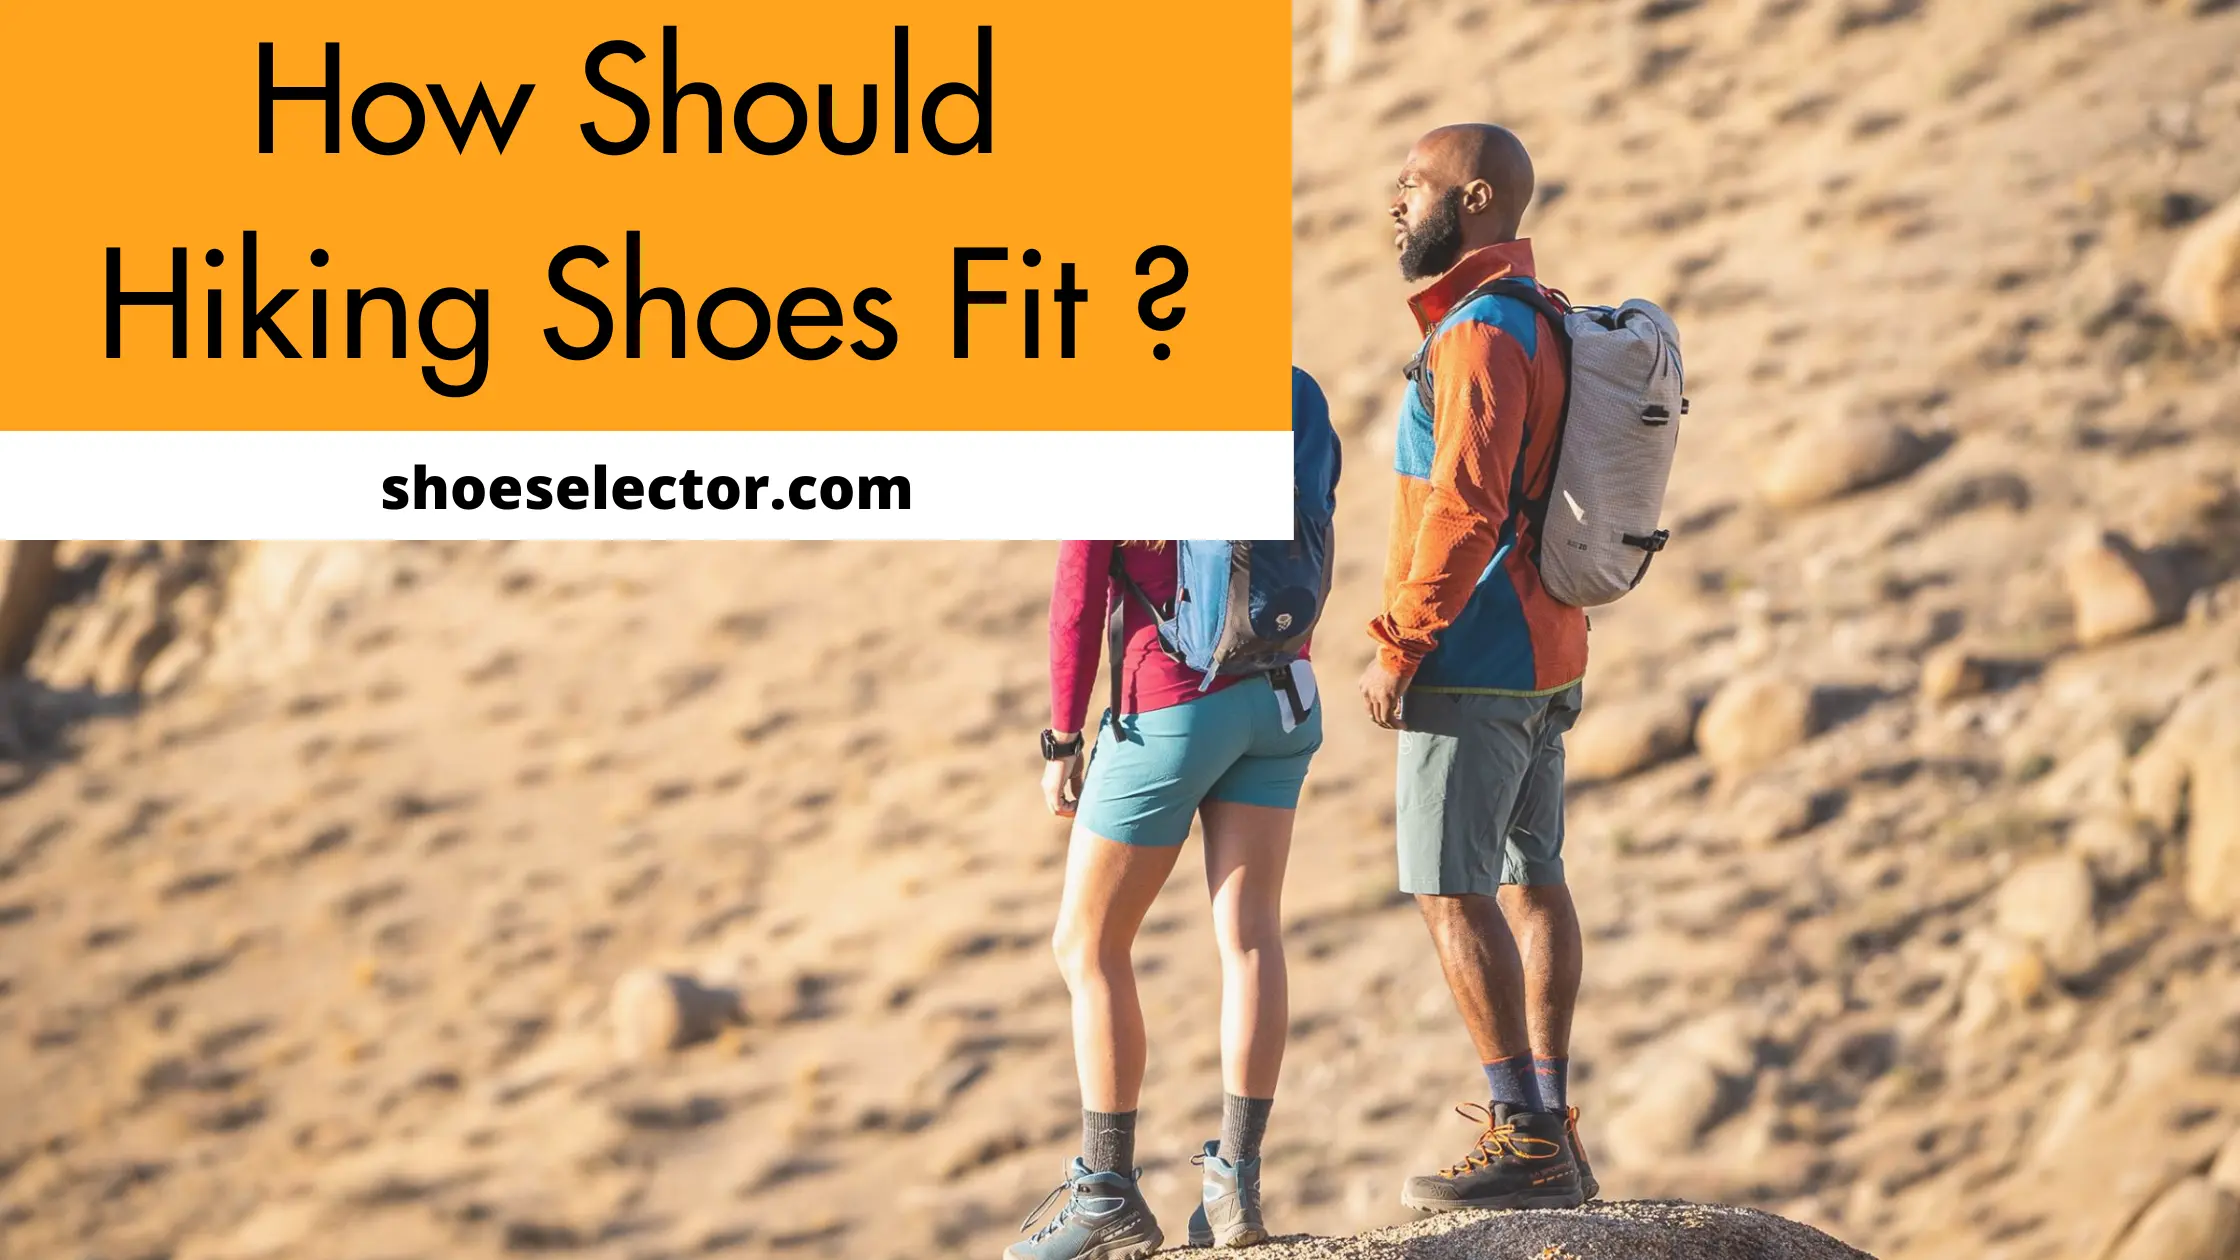 How Should Hiking Shoes Fit? #1 Recommended Guide